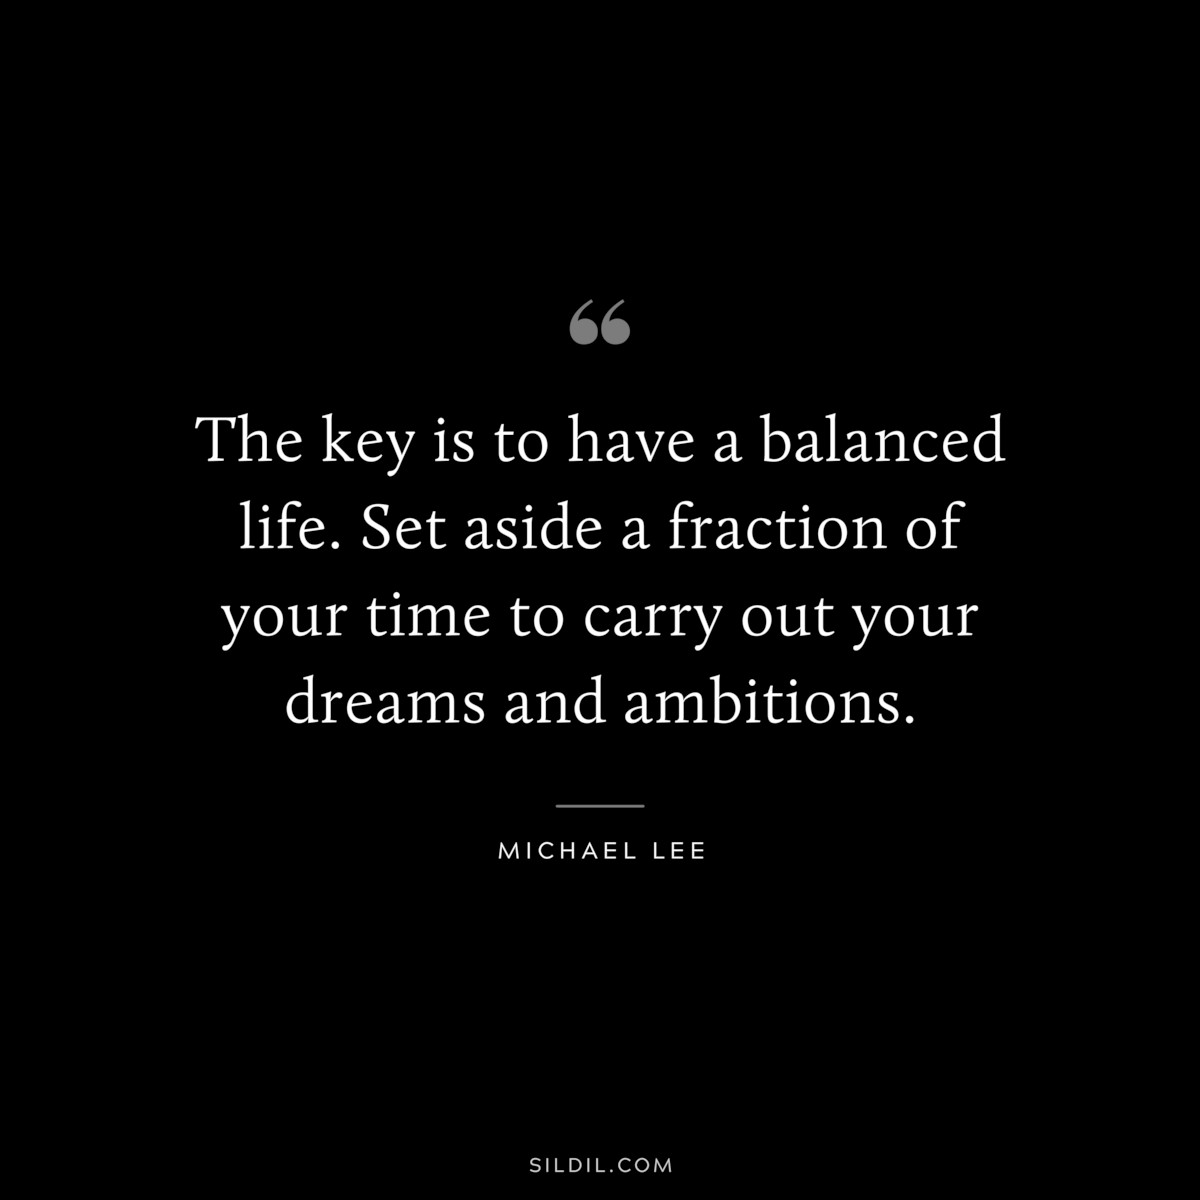 The key is to have a balanced life. Set aside a fraction of your time to carry out your dreams and ambitions. ― Michael Lee